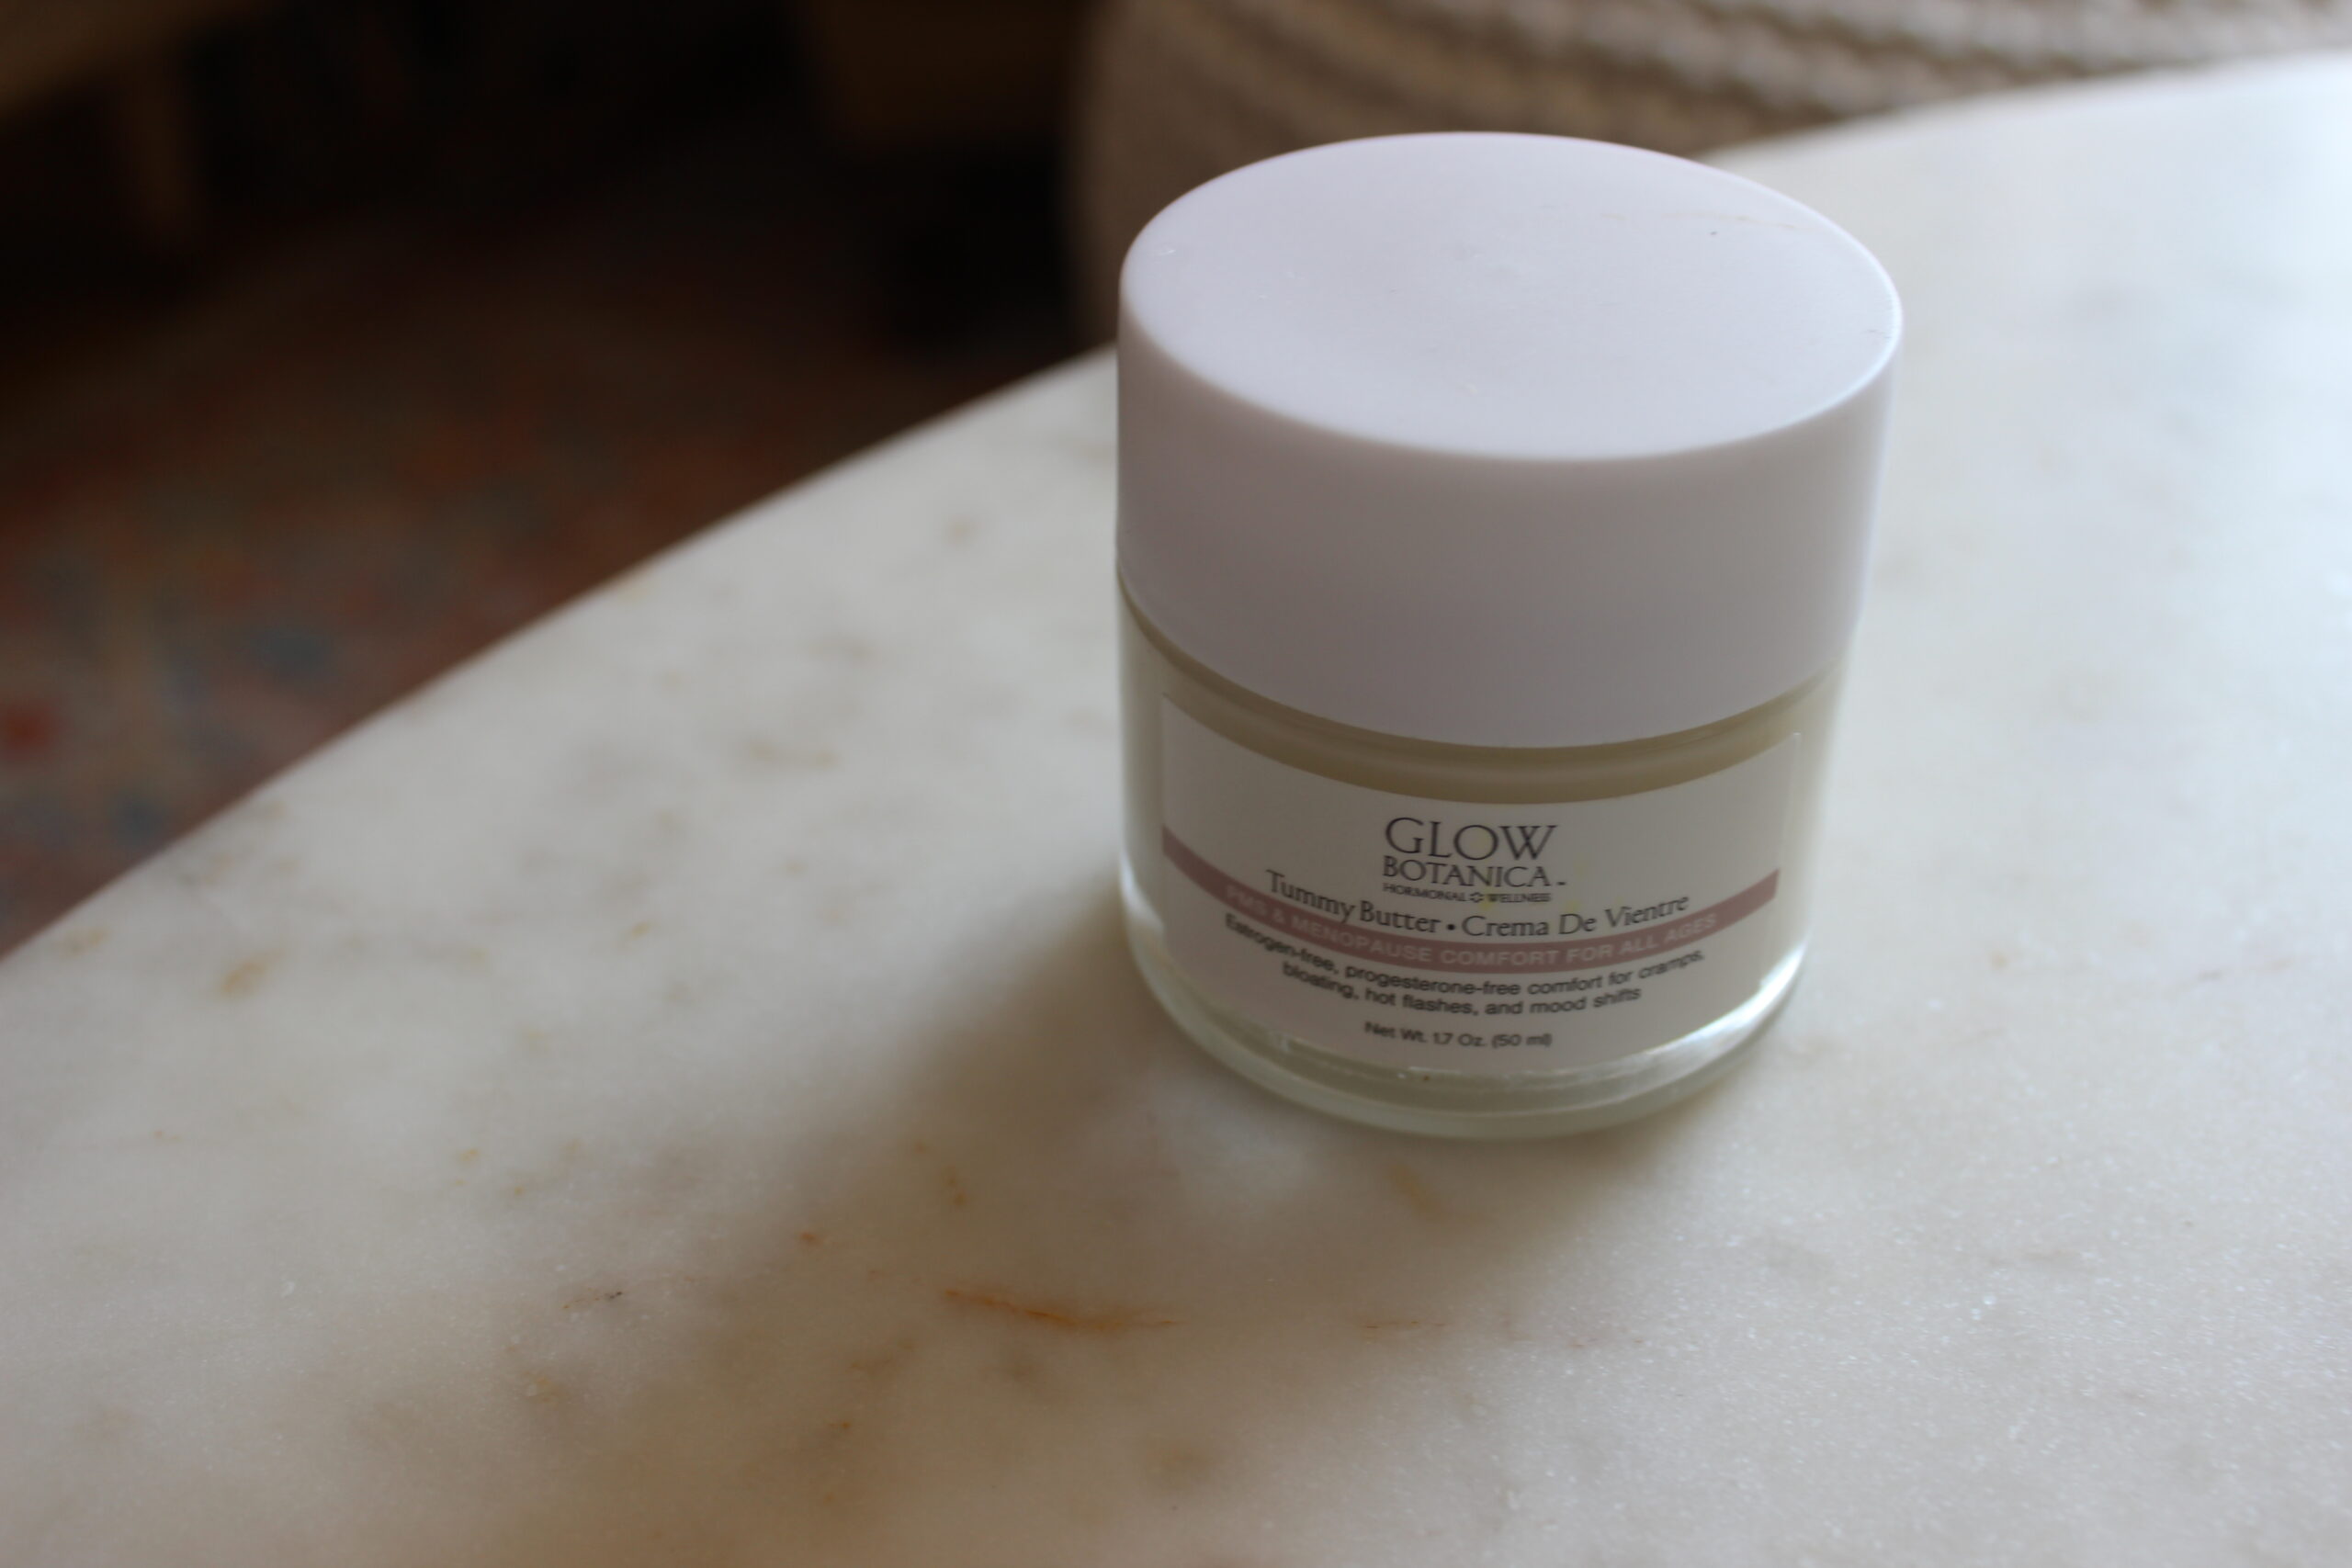 Glow Botanica Tummy Butter Topical Supplement